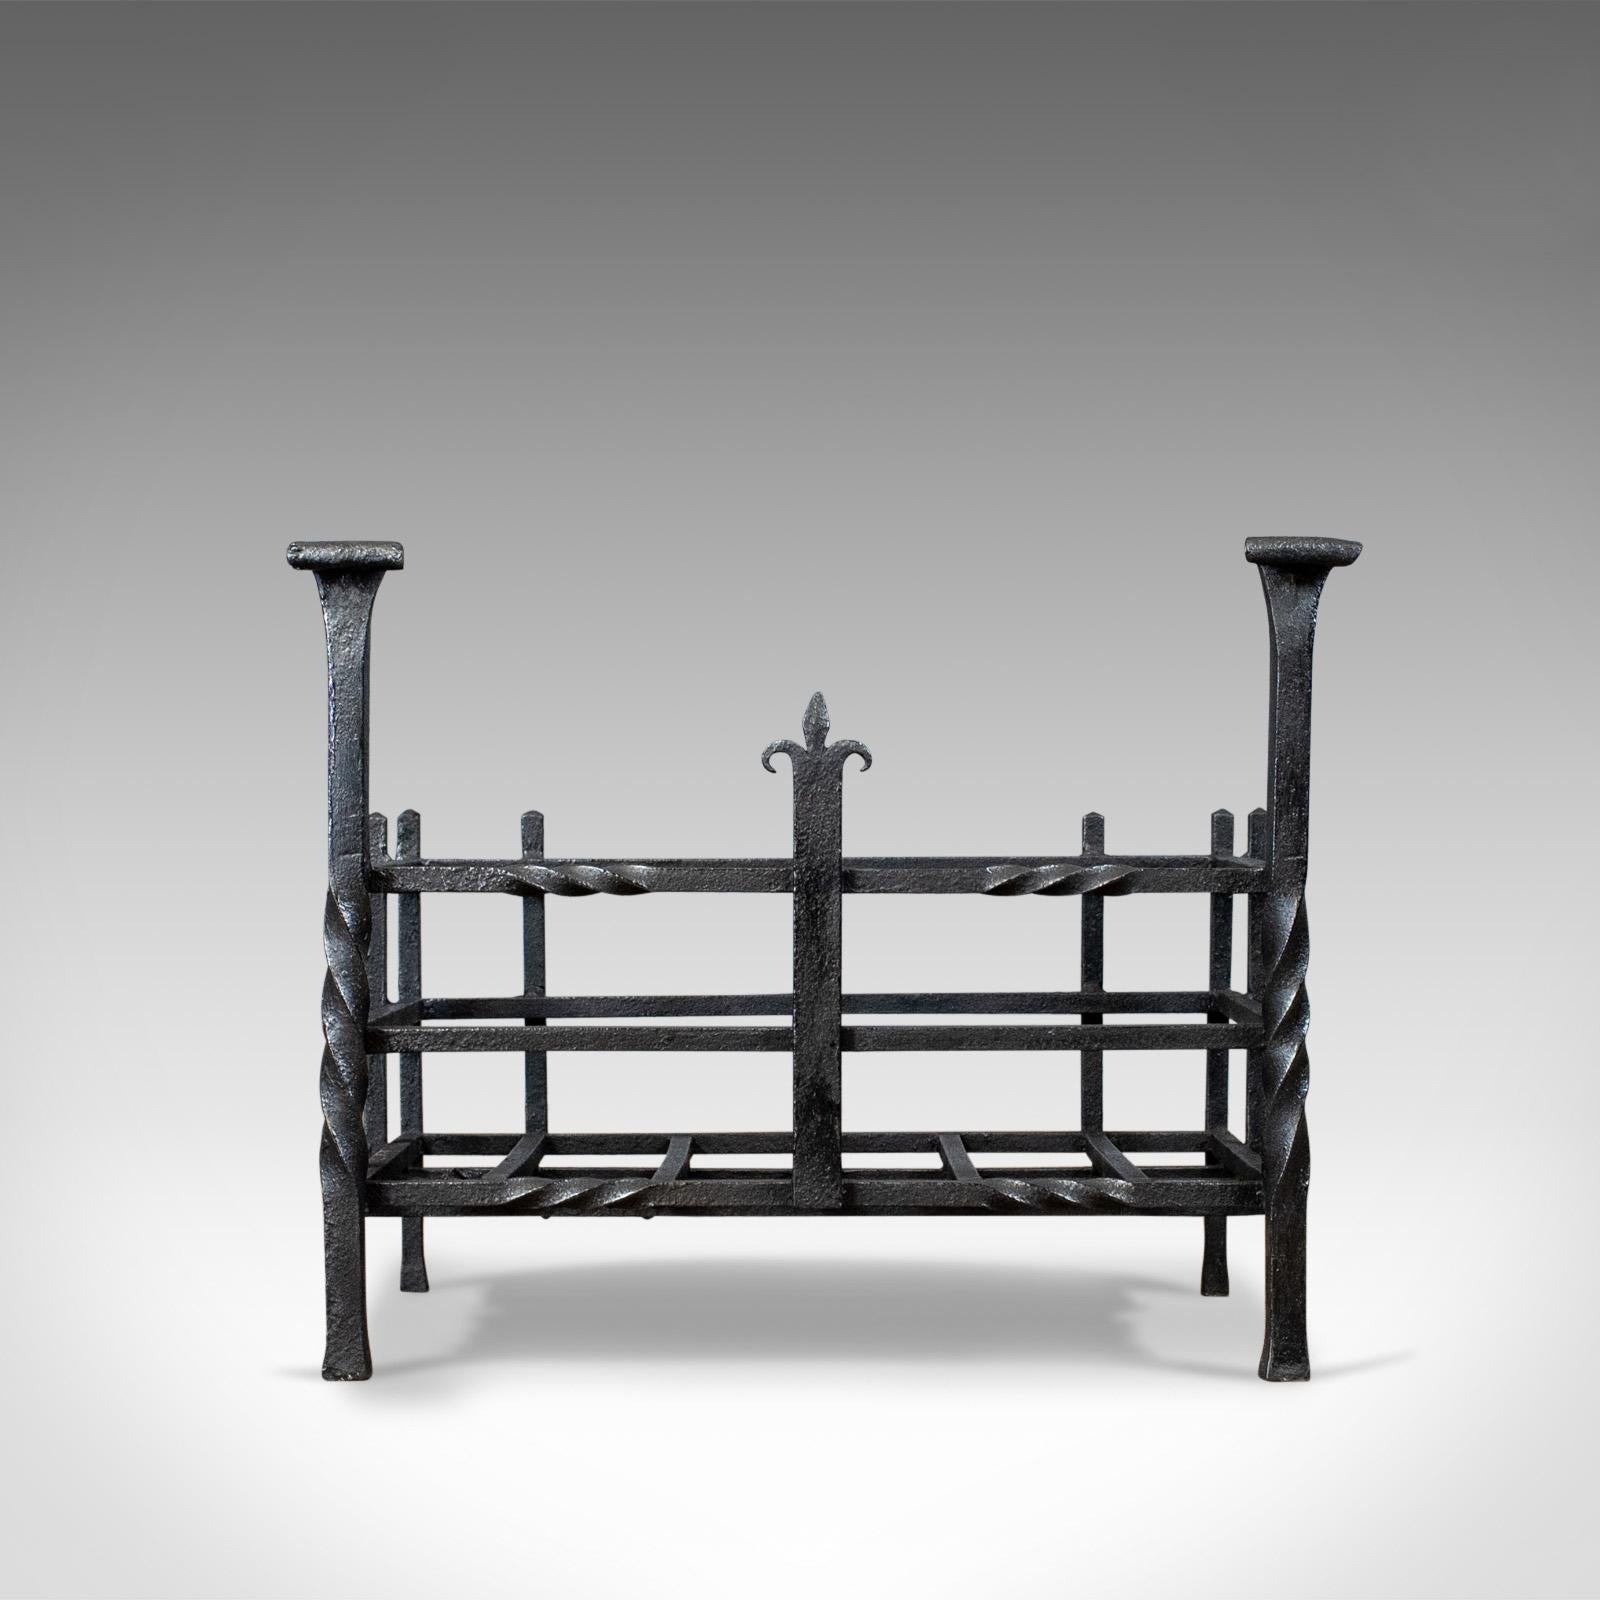 This is an antique fire basket in the Gothic taste, an English, free-standing, forged iron fireplace grate dating to the late Victorian period, circa 1900.

Attractive styling offering a generous basket 
Suitable for all fuel types
Bar twist